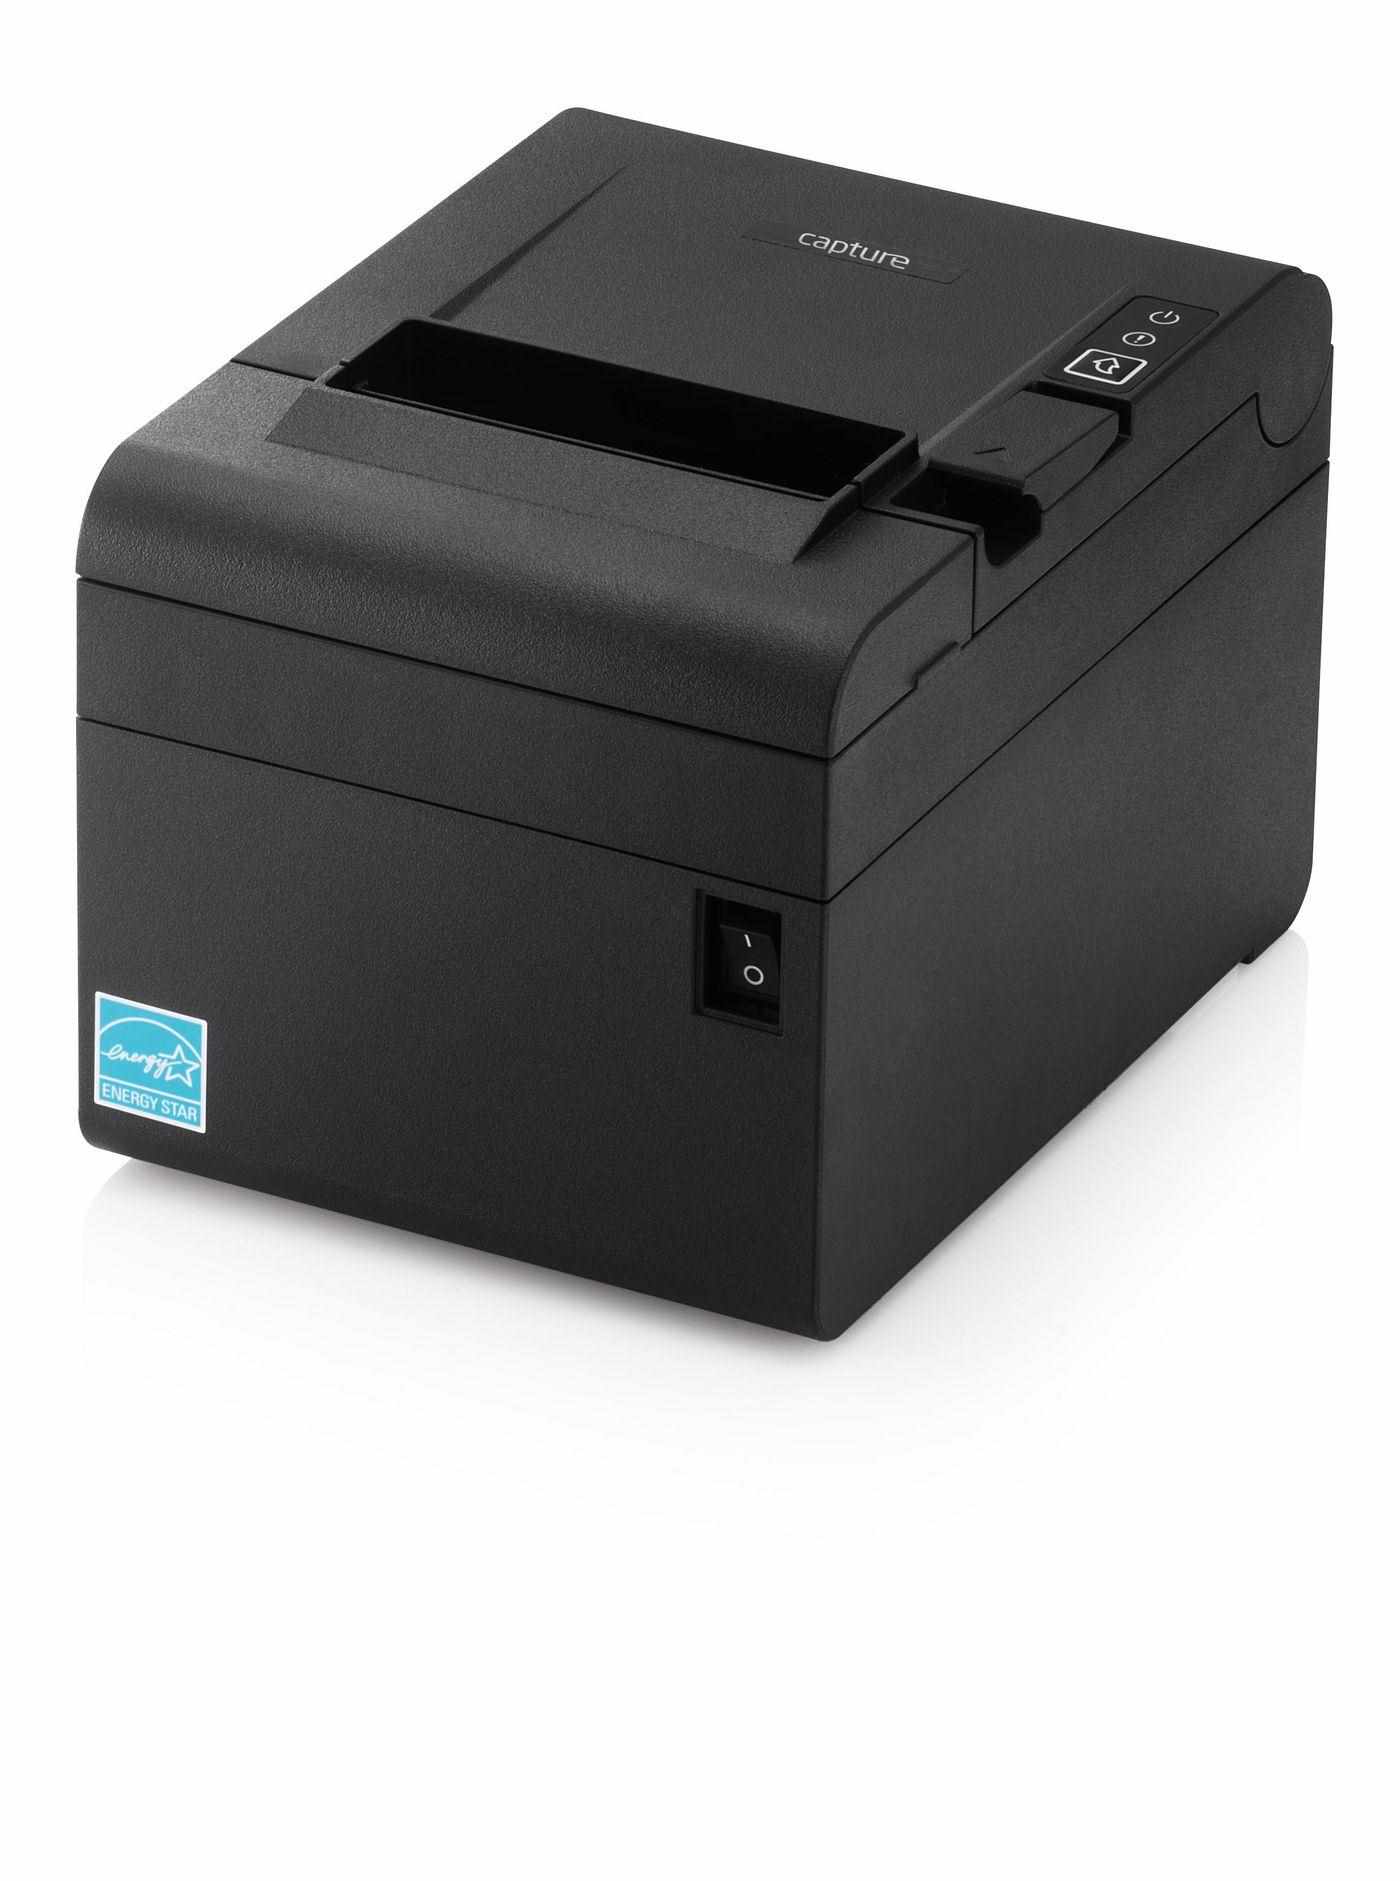 Capture direct thermal printer with Ethernet,  Serial and USB connection. USB cable and power supply included0 